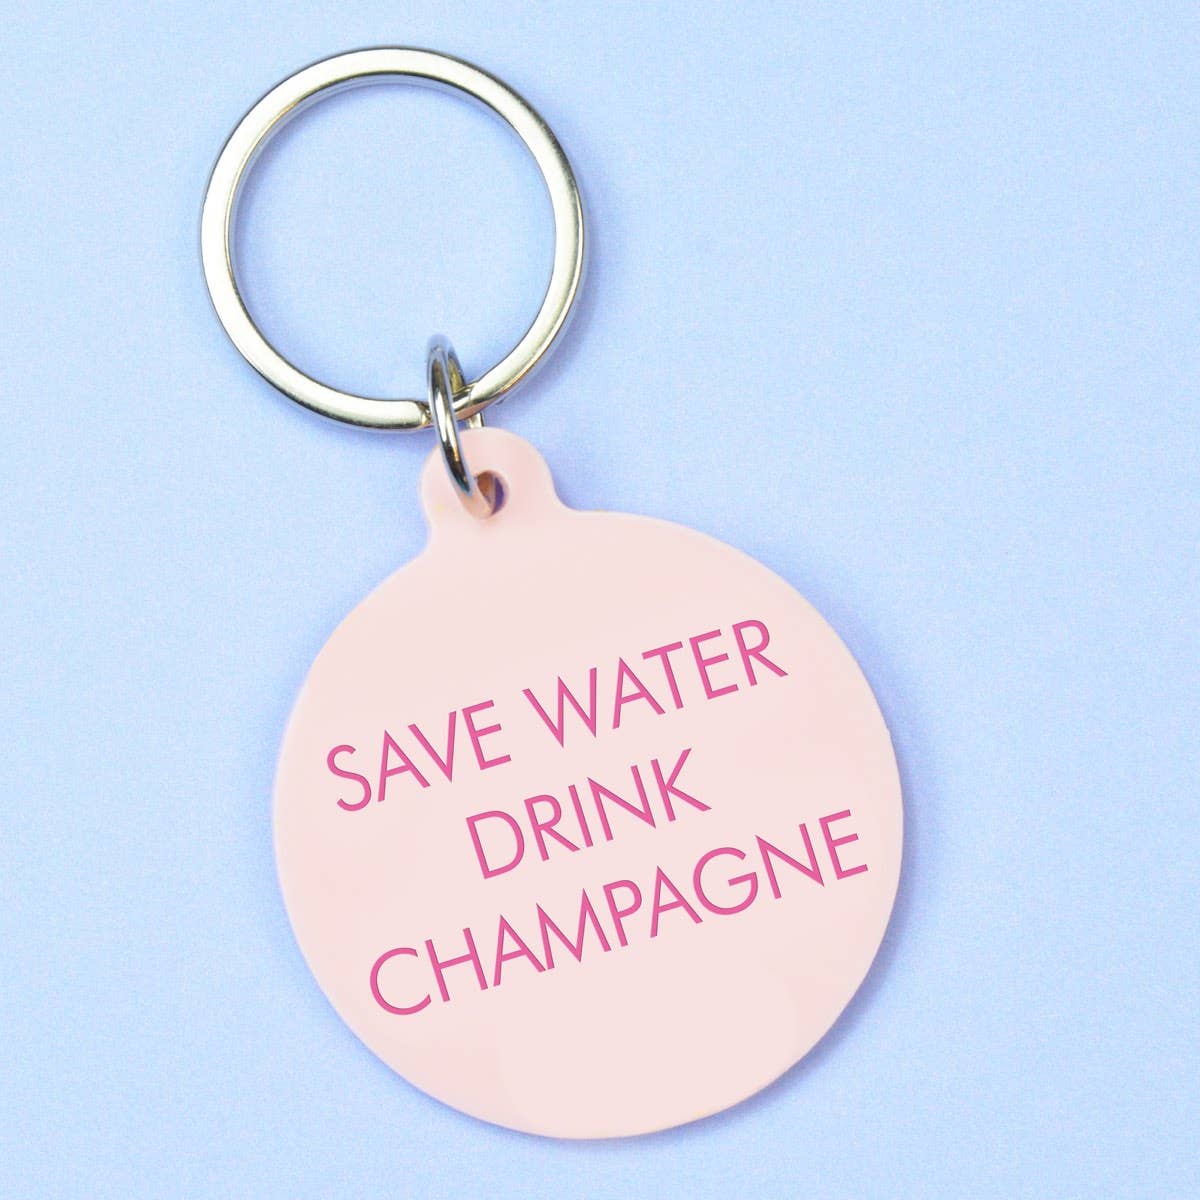 Save Water Drink Champagne Keytag